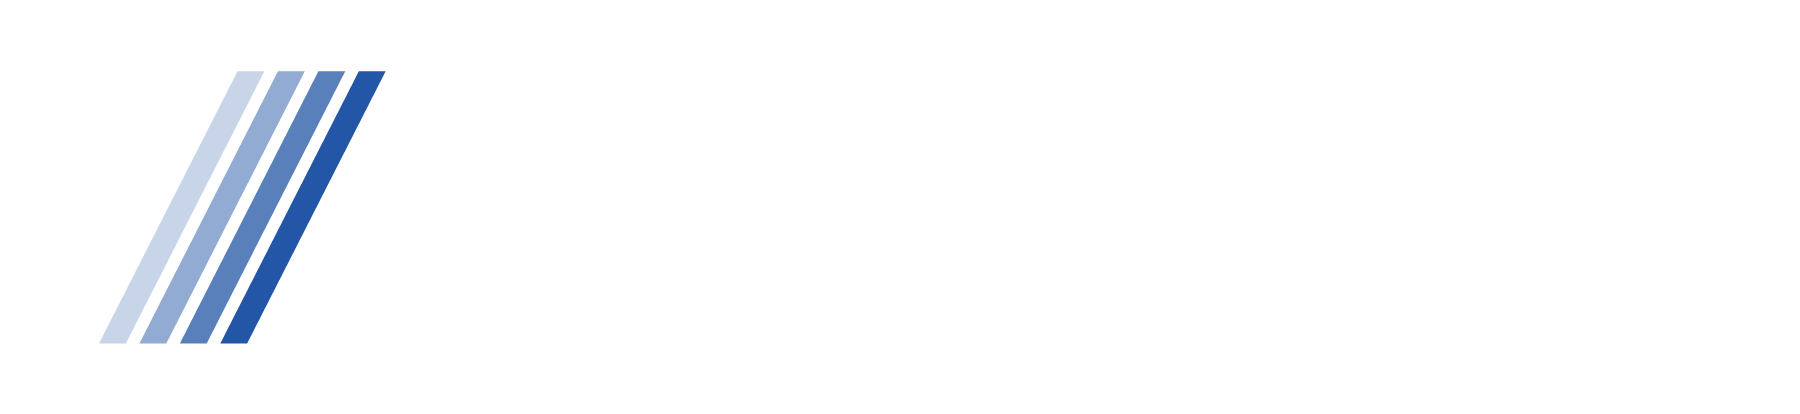 A logo for United Motorsports. 3 blue slanted vertical lines to the left of the text.